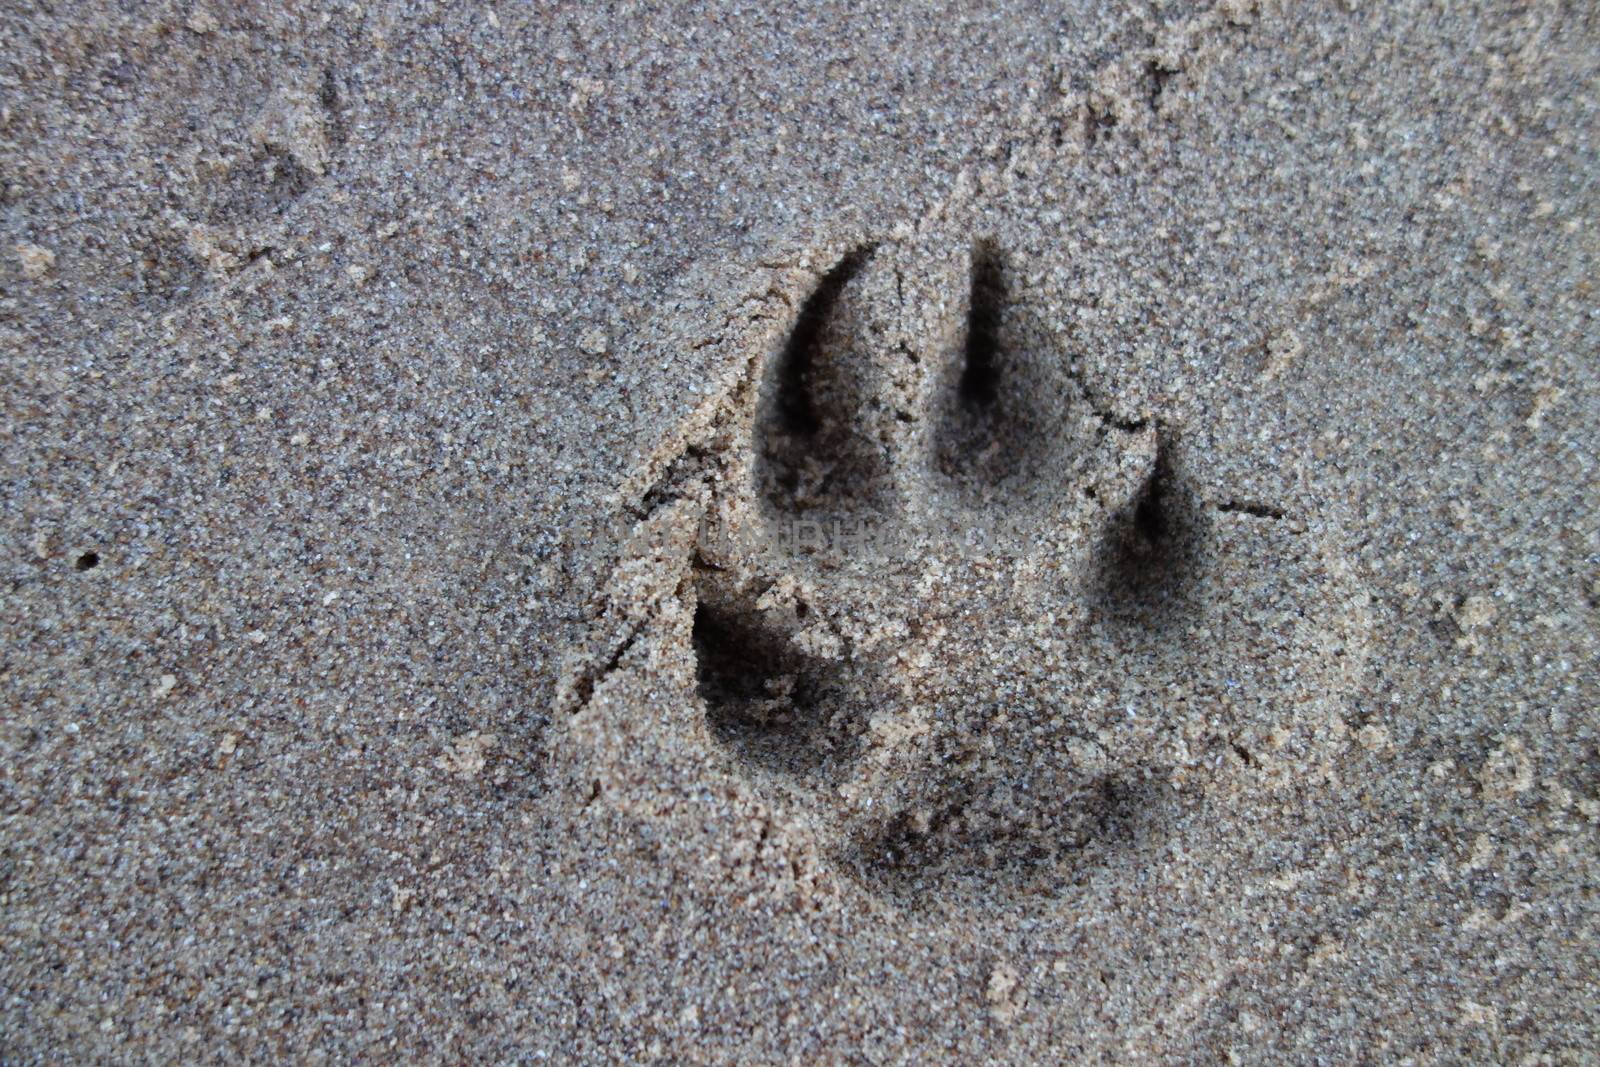 Dog paw print in the sand on a beach